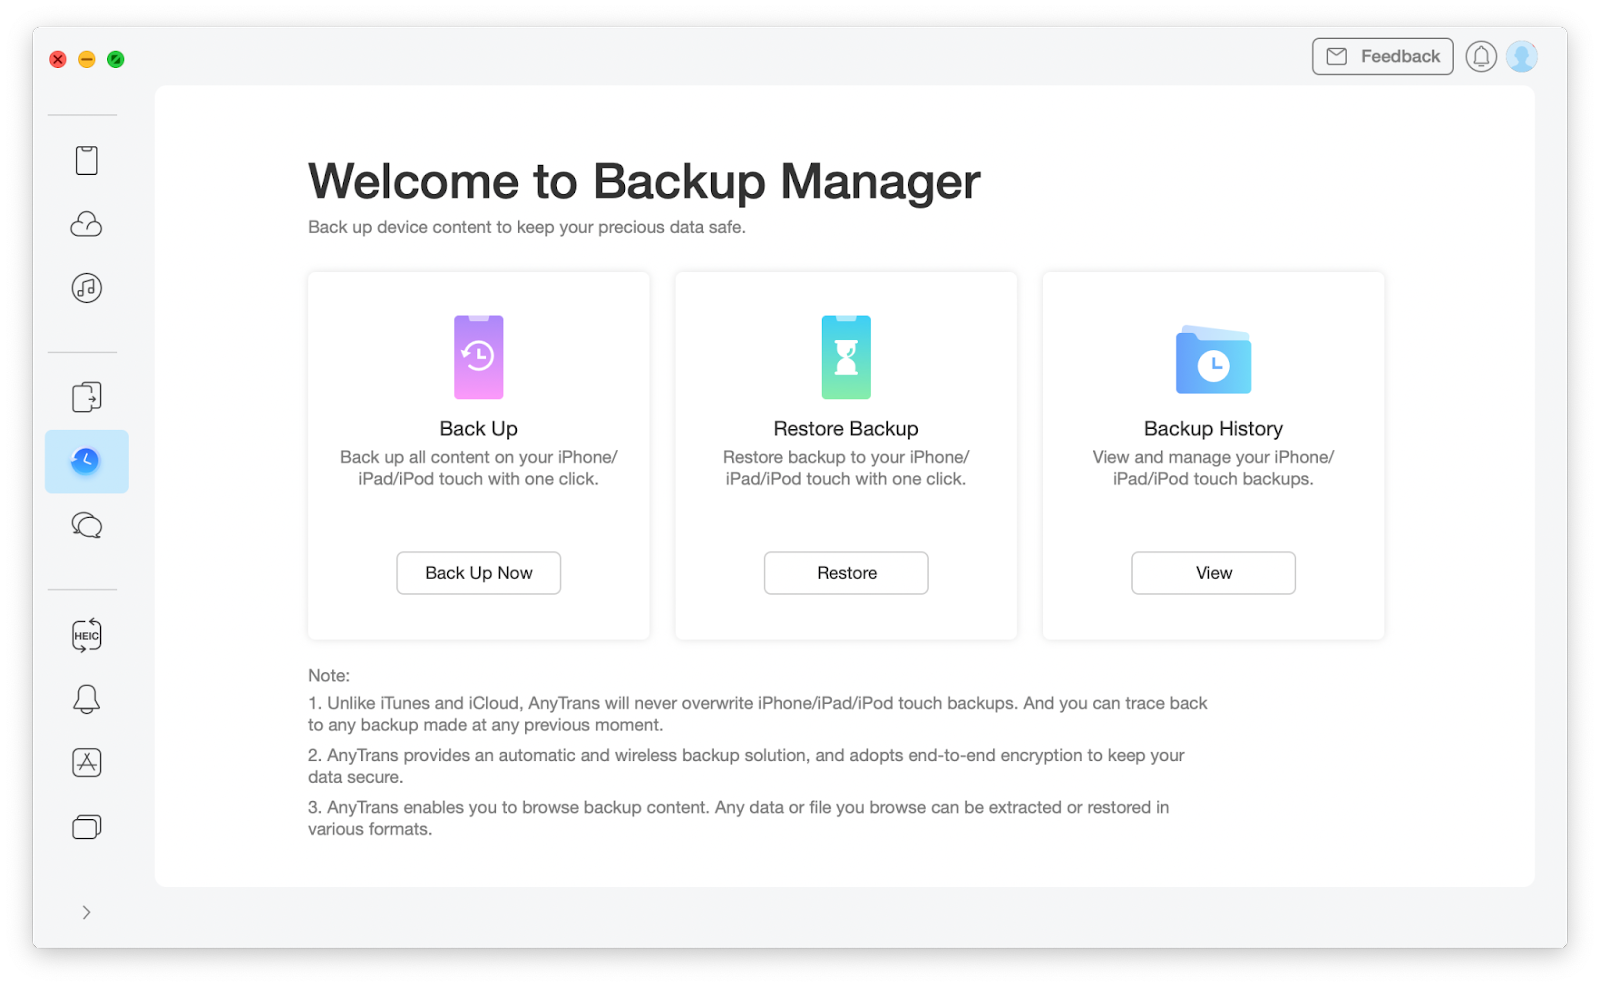 Welcome to Backup Manager